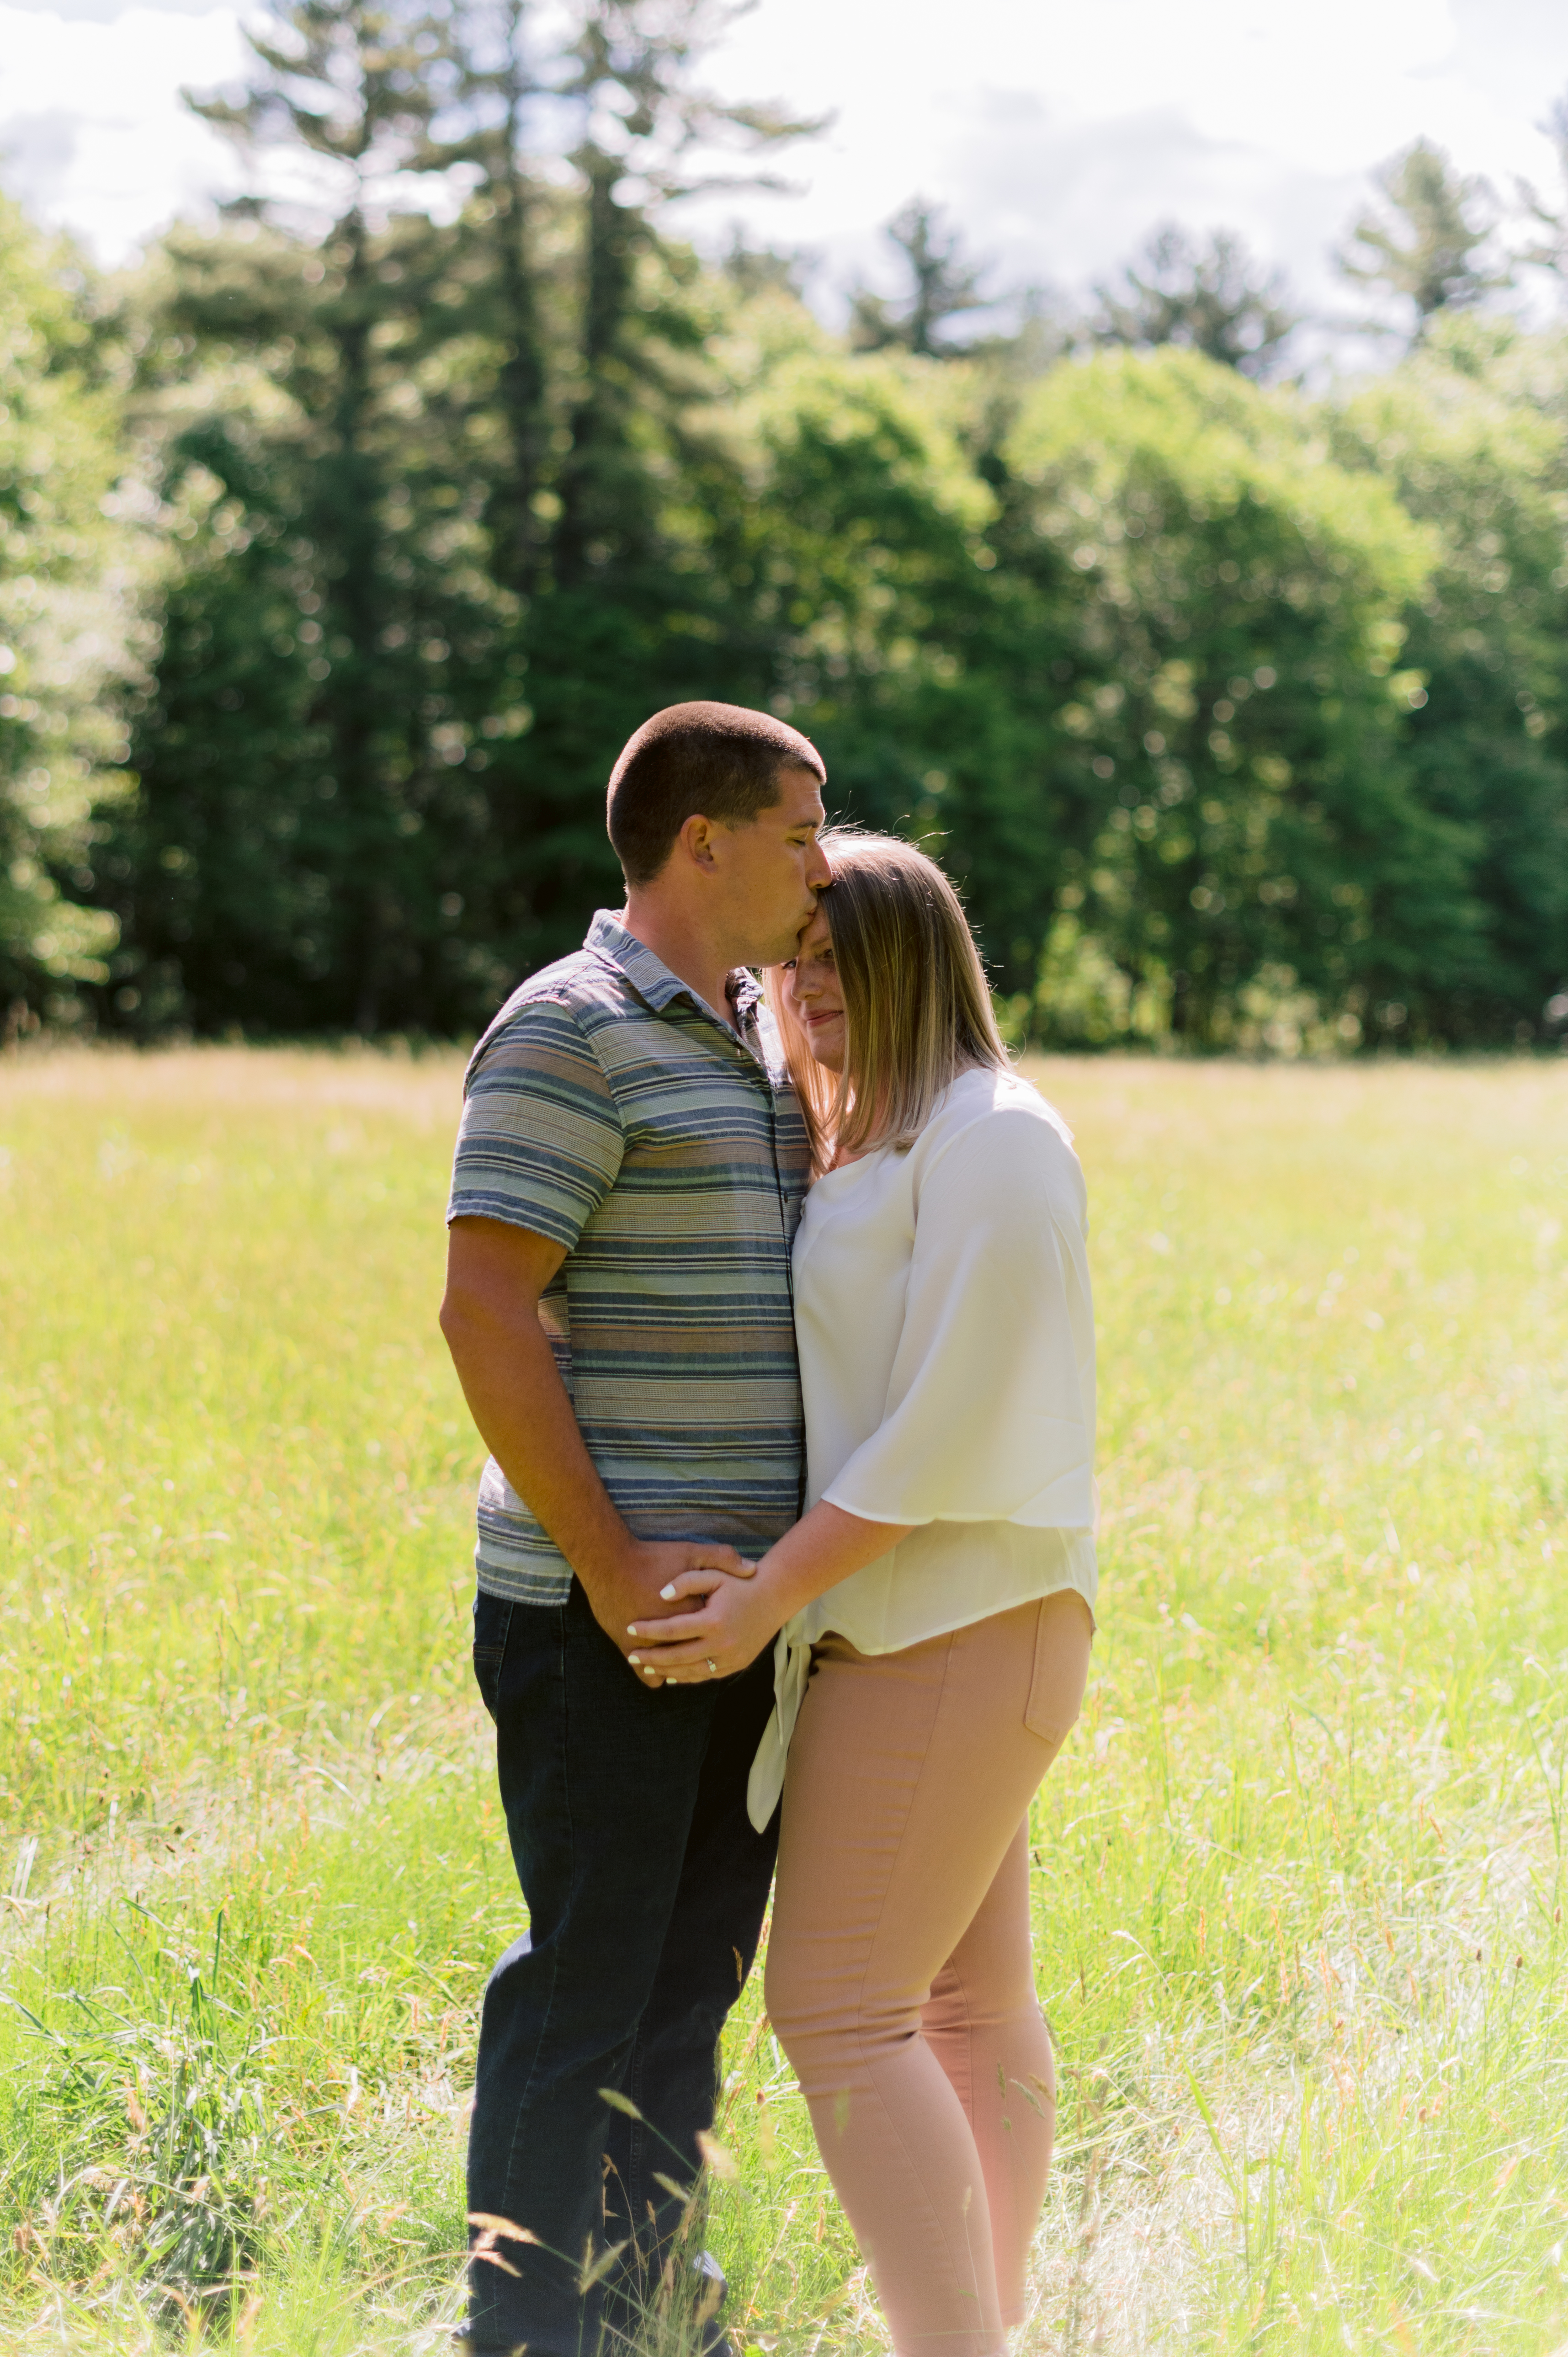 Man kisses woman on the forehead in field during summer engagement session at Borderland State Park